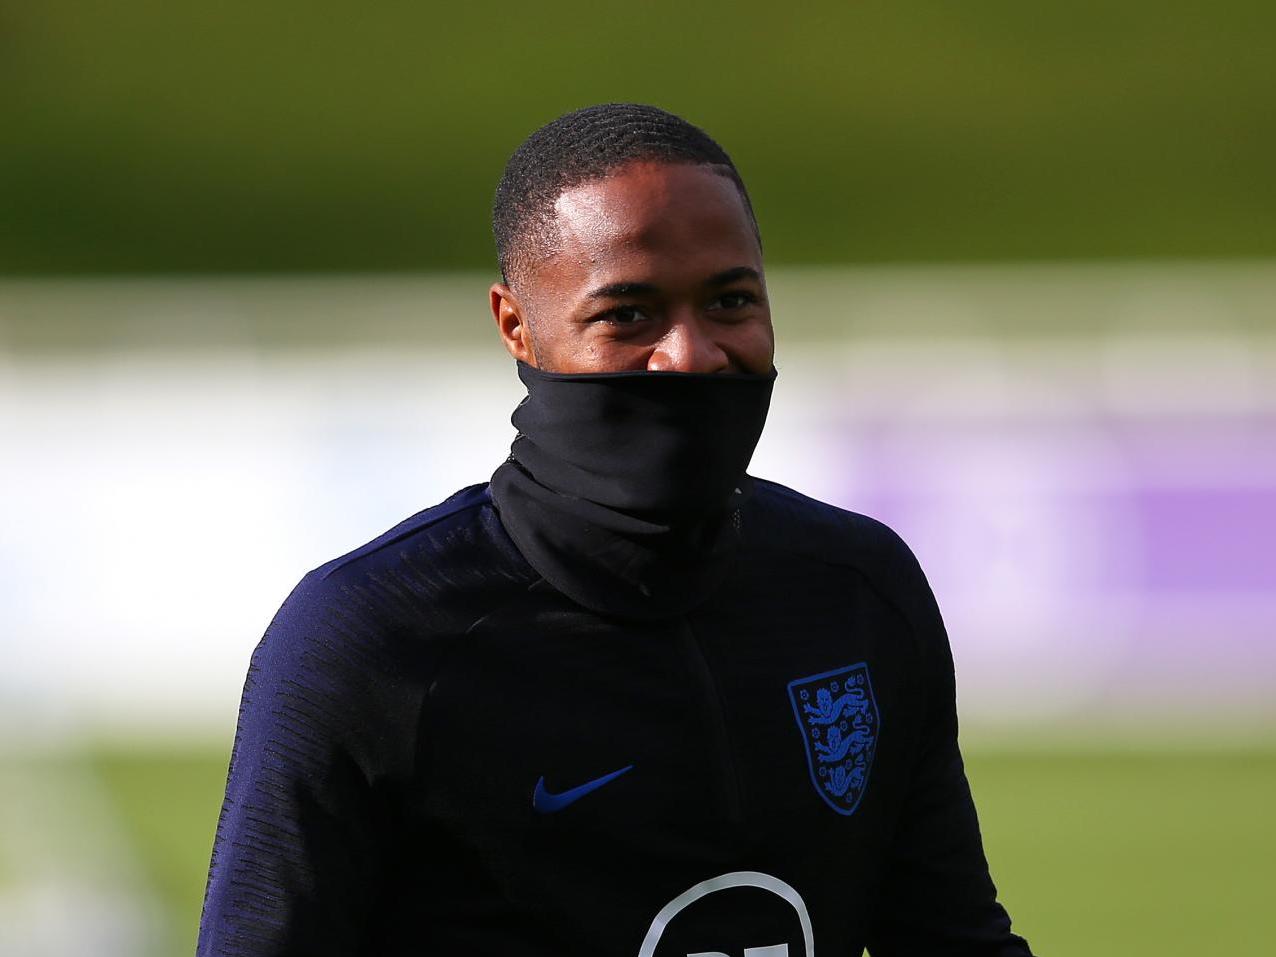 Sterling has been dropped for the next England international